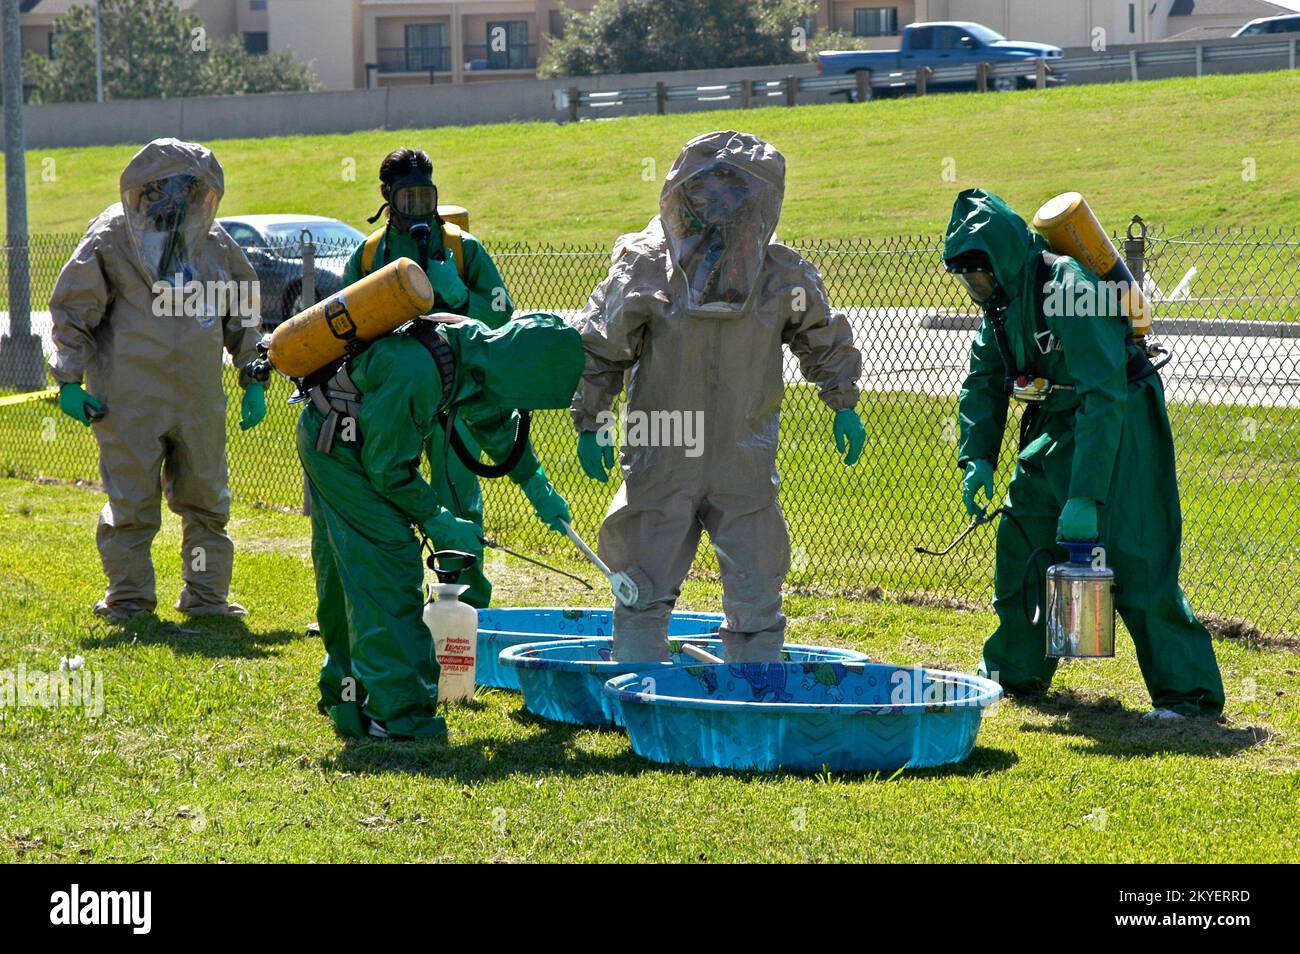 Hurricane Katrina/Hurricane Rita, Baton Rouge, La., October 9., 2005 - Members of an area Emergency Medical Technician team undergo training required for certification as rescue (grey suits) and decontamination (green suits) unit responders to hazardous material and toxic contamination situations. The HAZMAT responders who are cleaning up the spills and contaminations caused by Hurricanes Kartrina and Rita have all been certified through similar training courses. Win Henderson / FEMA Stock Photo